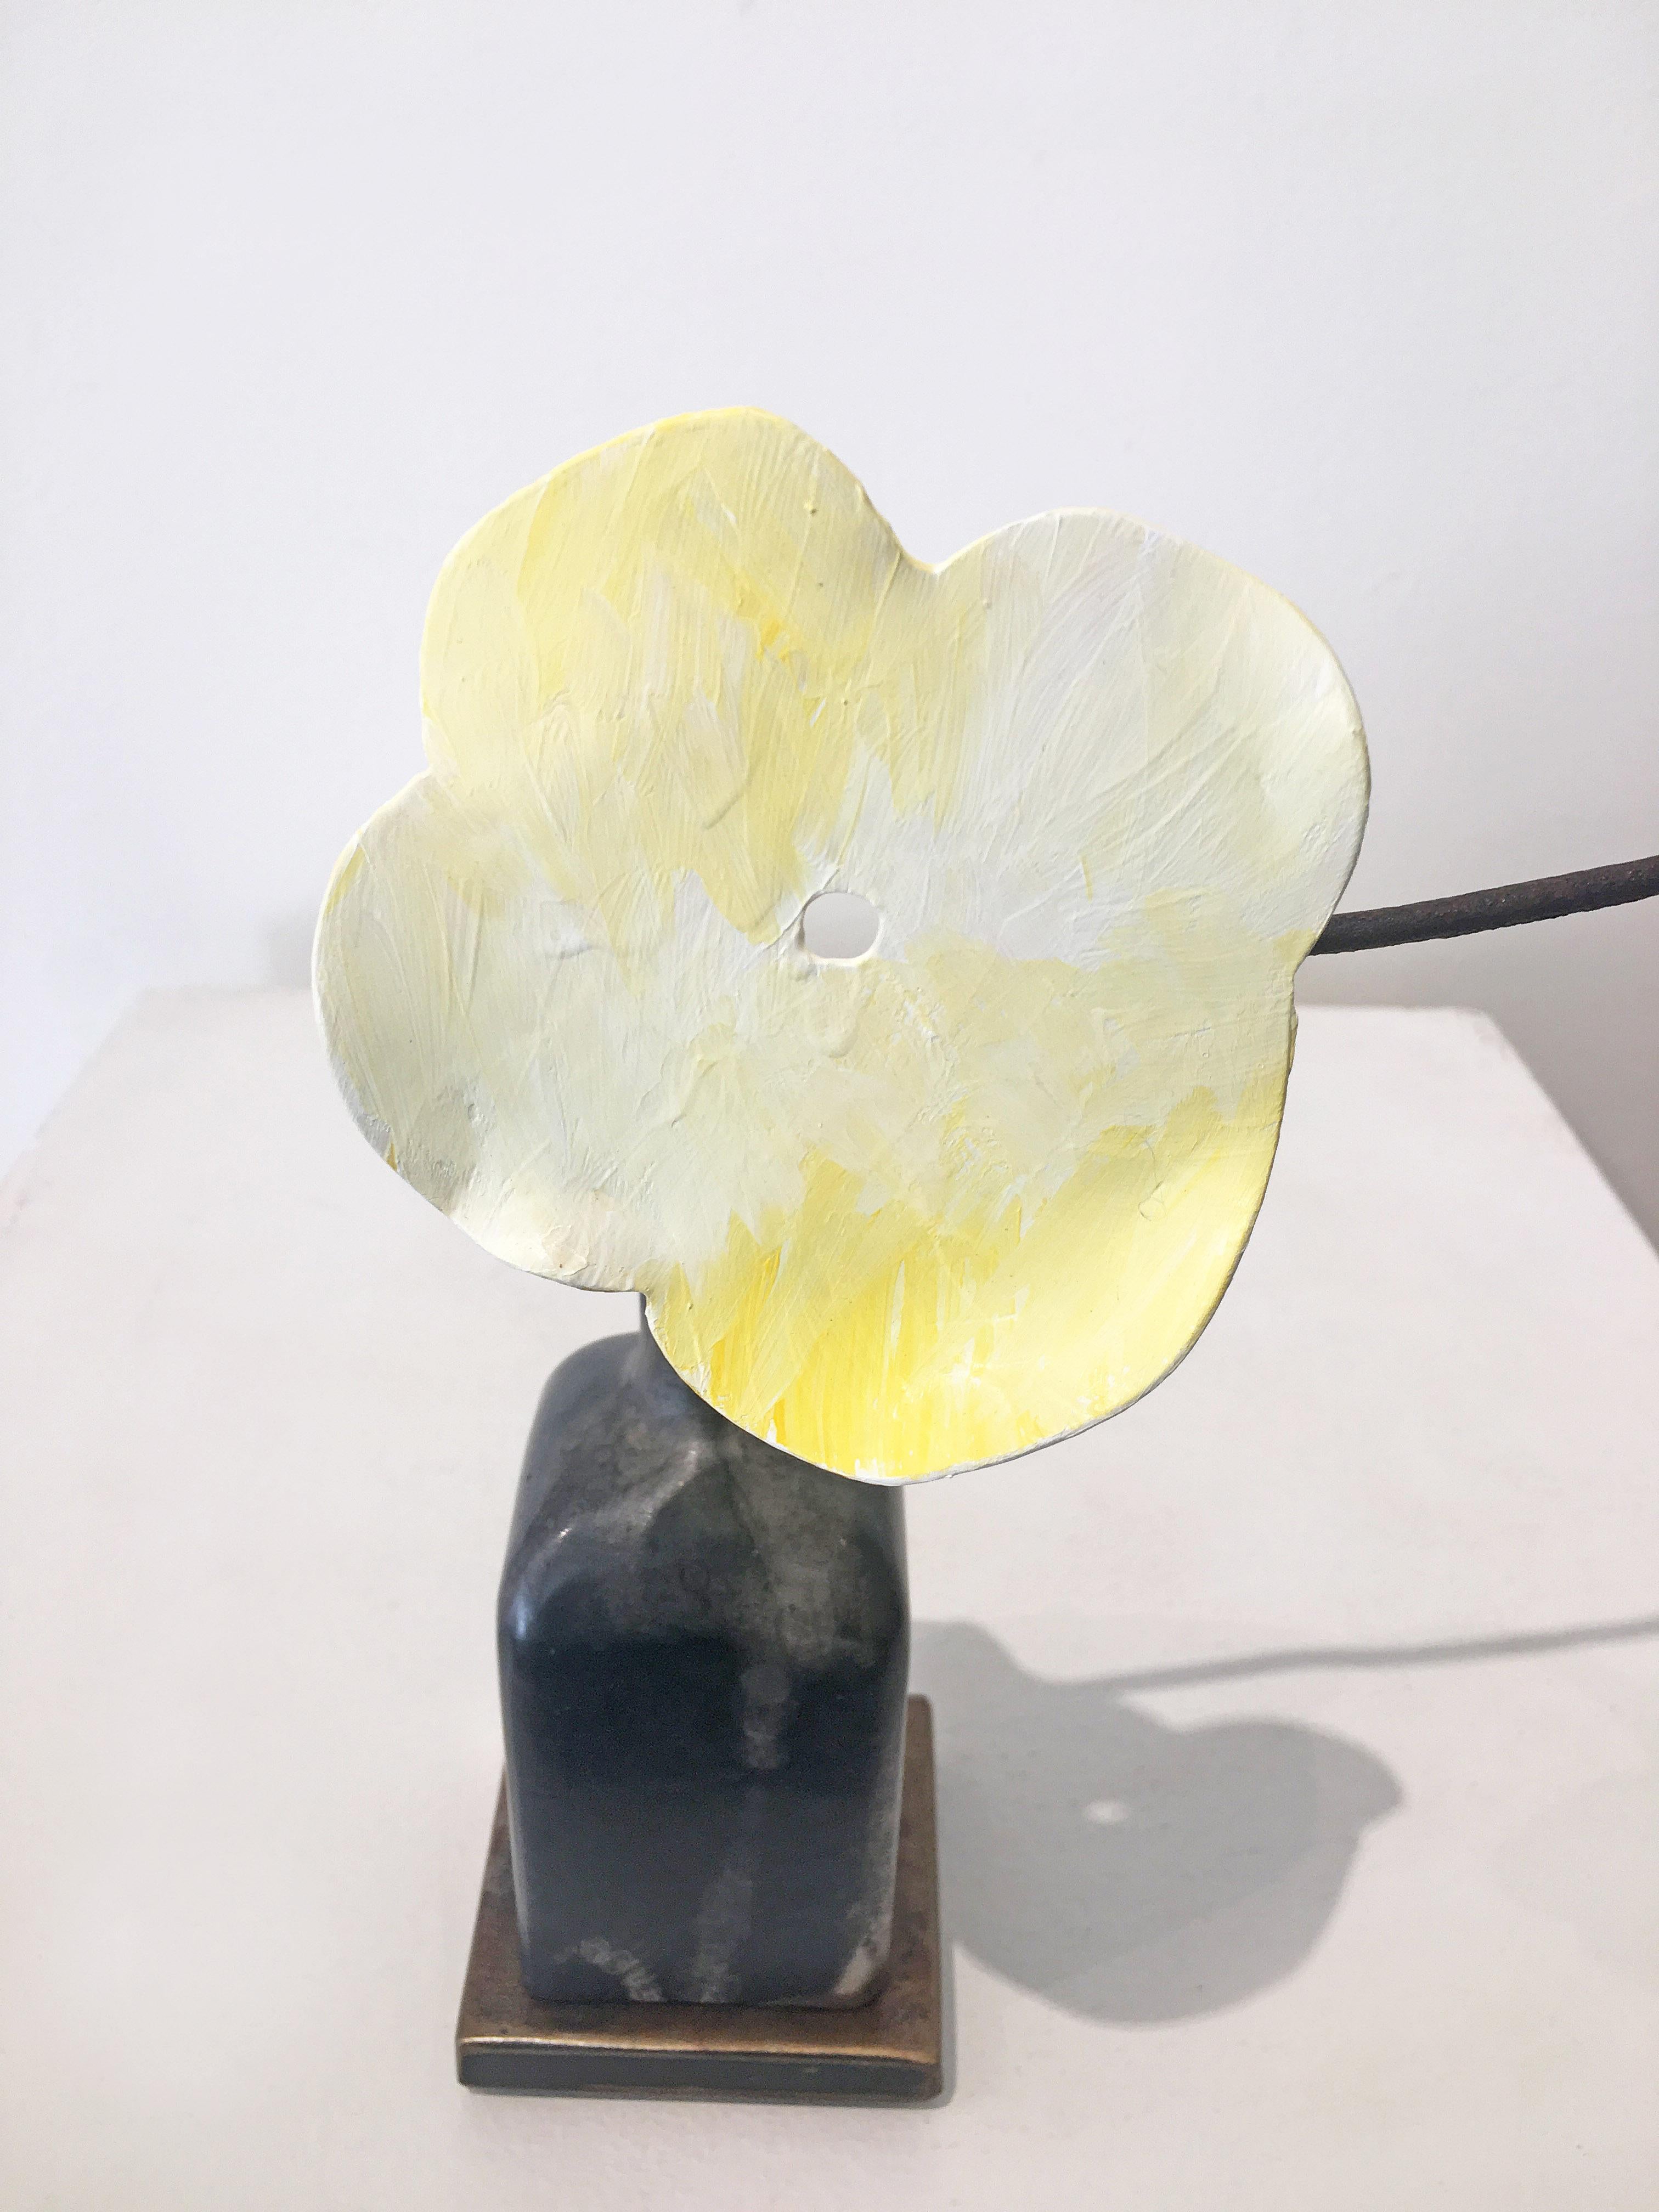 'Poppy with Seed' by David Kimball Anderson, 2018. Bronze, steel, and paint, 9.75 x 5 x 12 in. This sculpture features a square vase cast in bronze and finished in varying patinas of light and dark gray. The flower is in a yellow color and 1 yellow